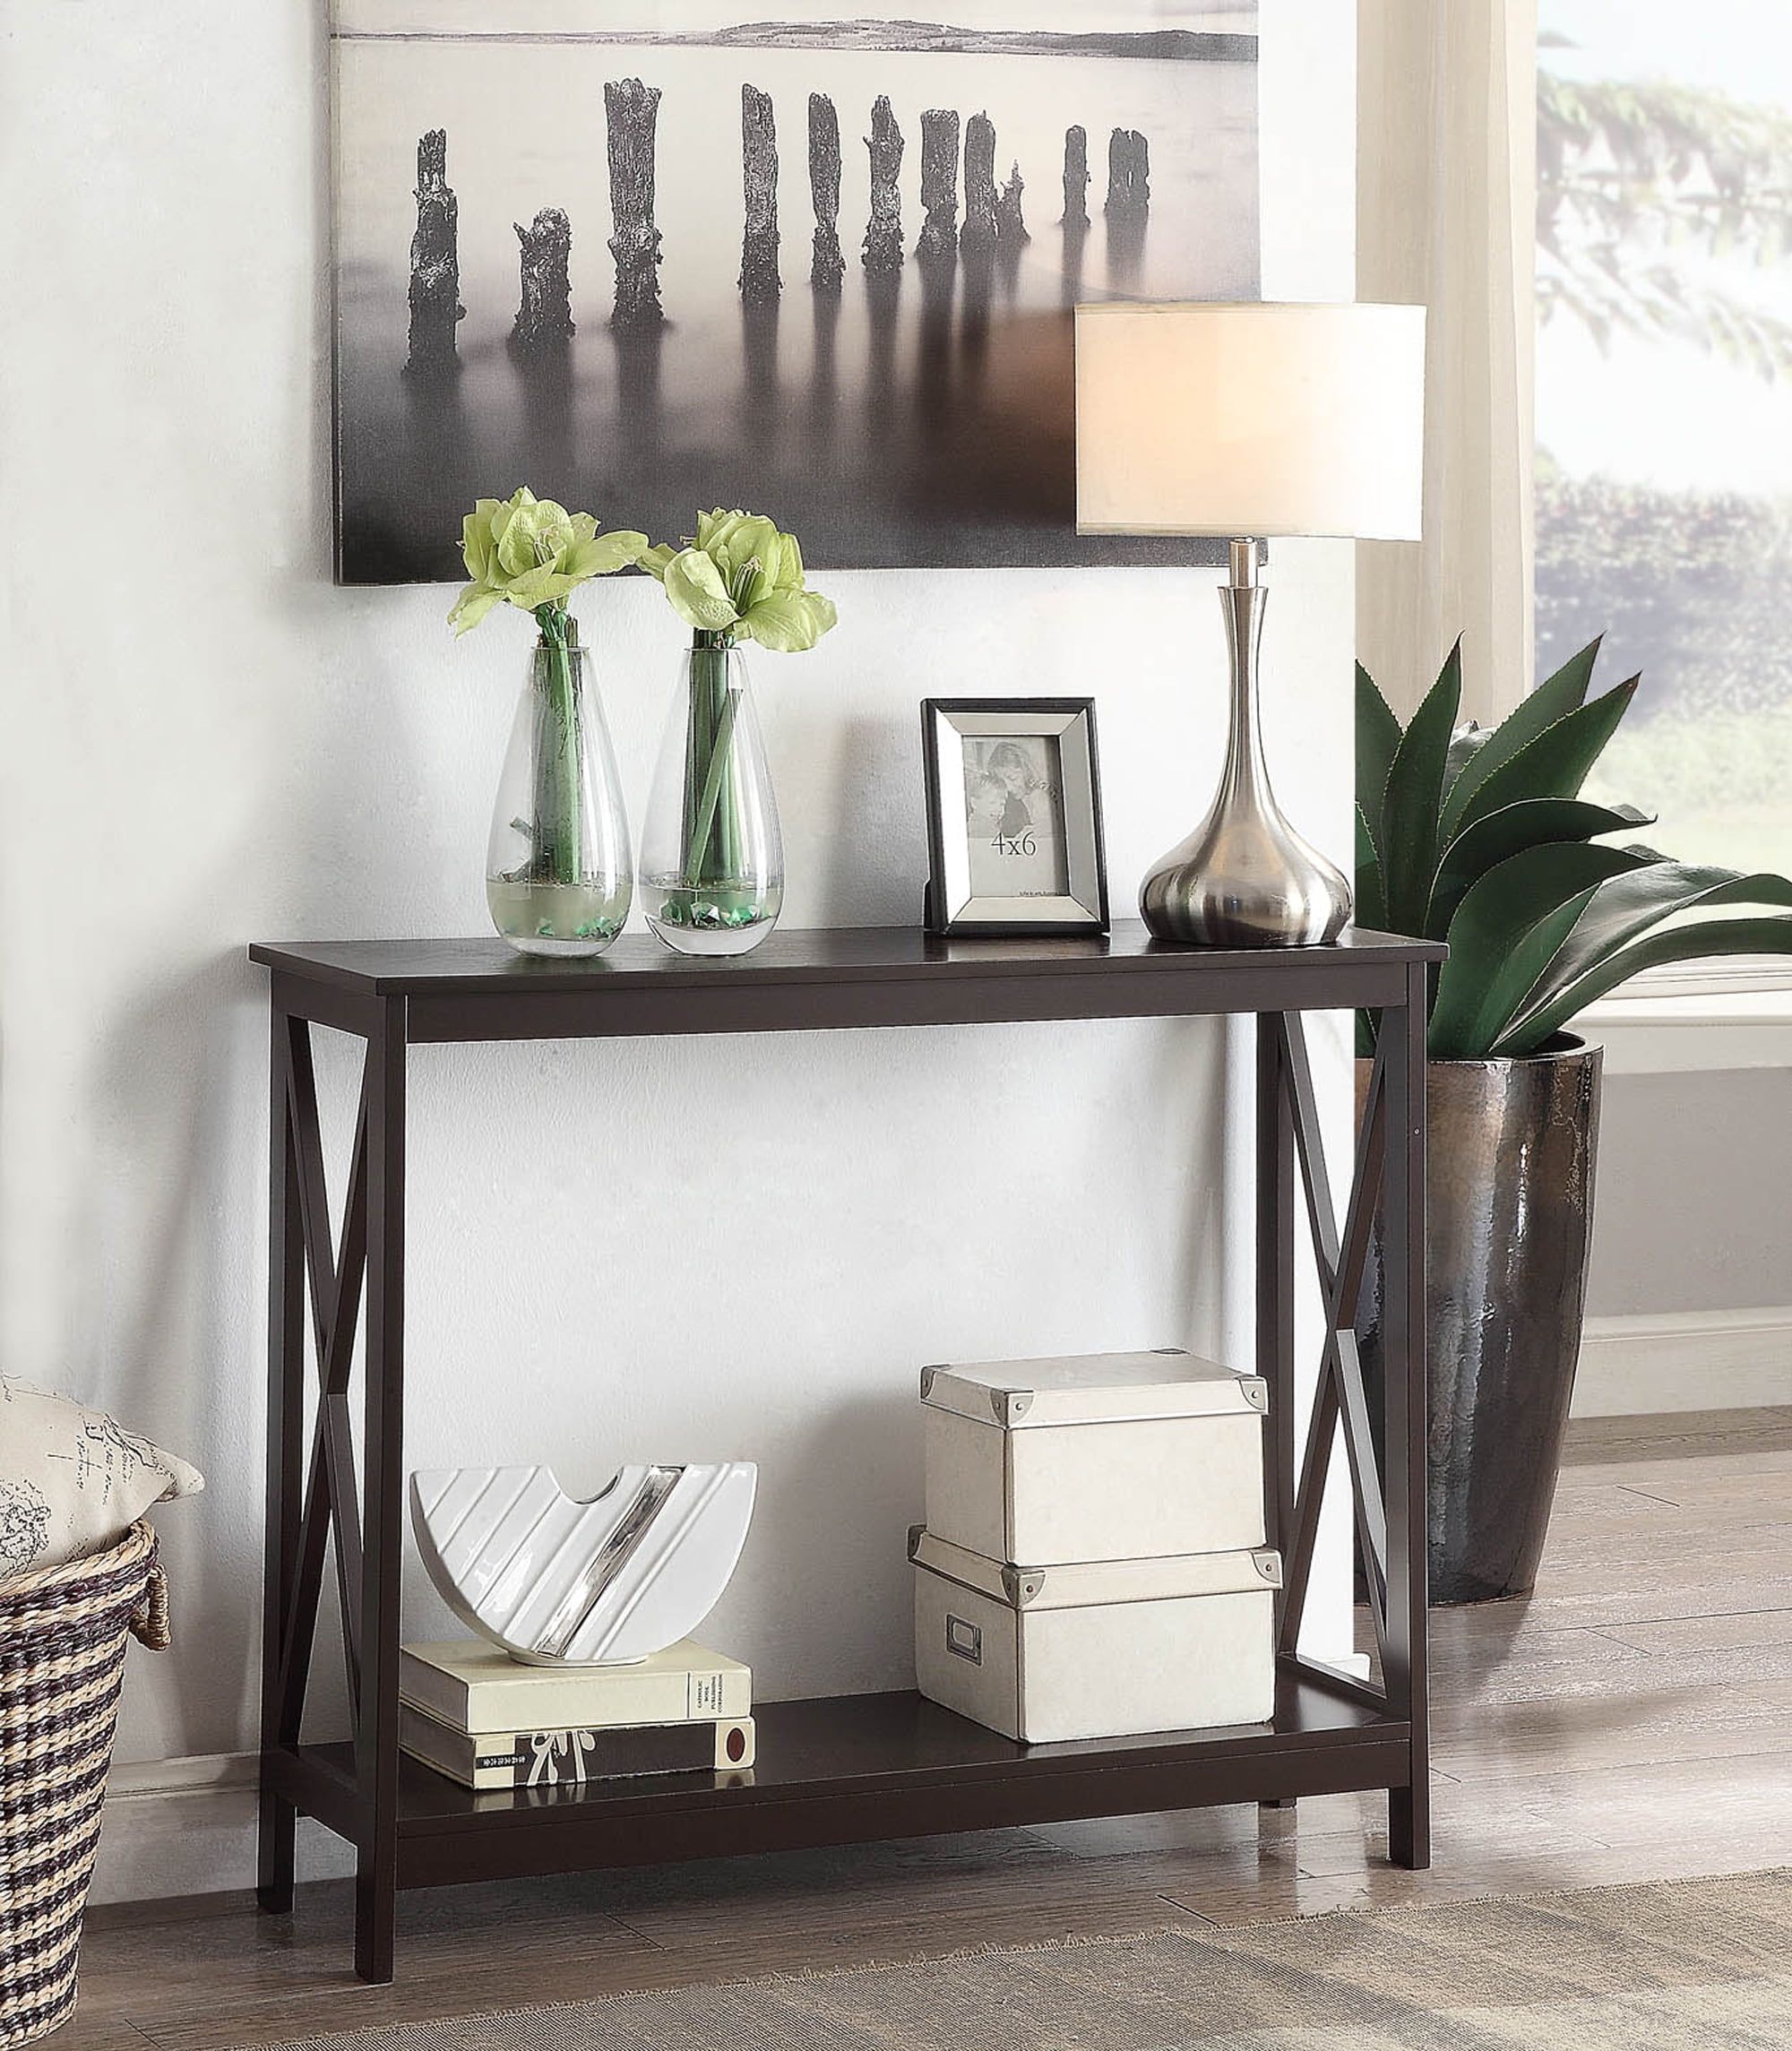 Espresso Wood Finish Oxford Console Table with Dual Storage Shelves